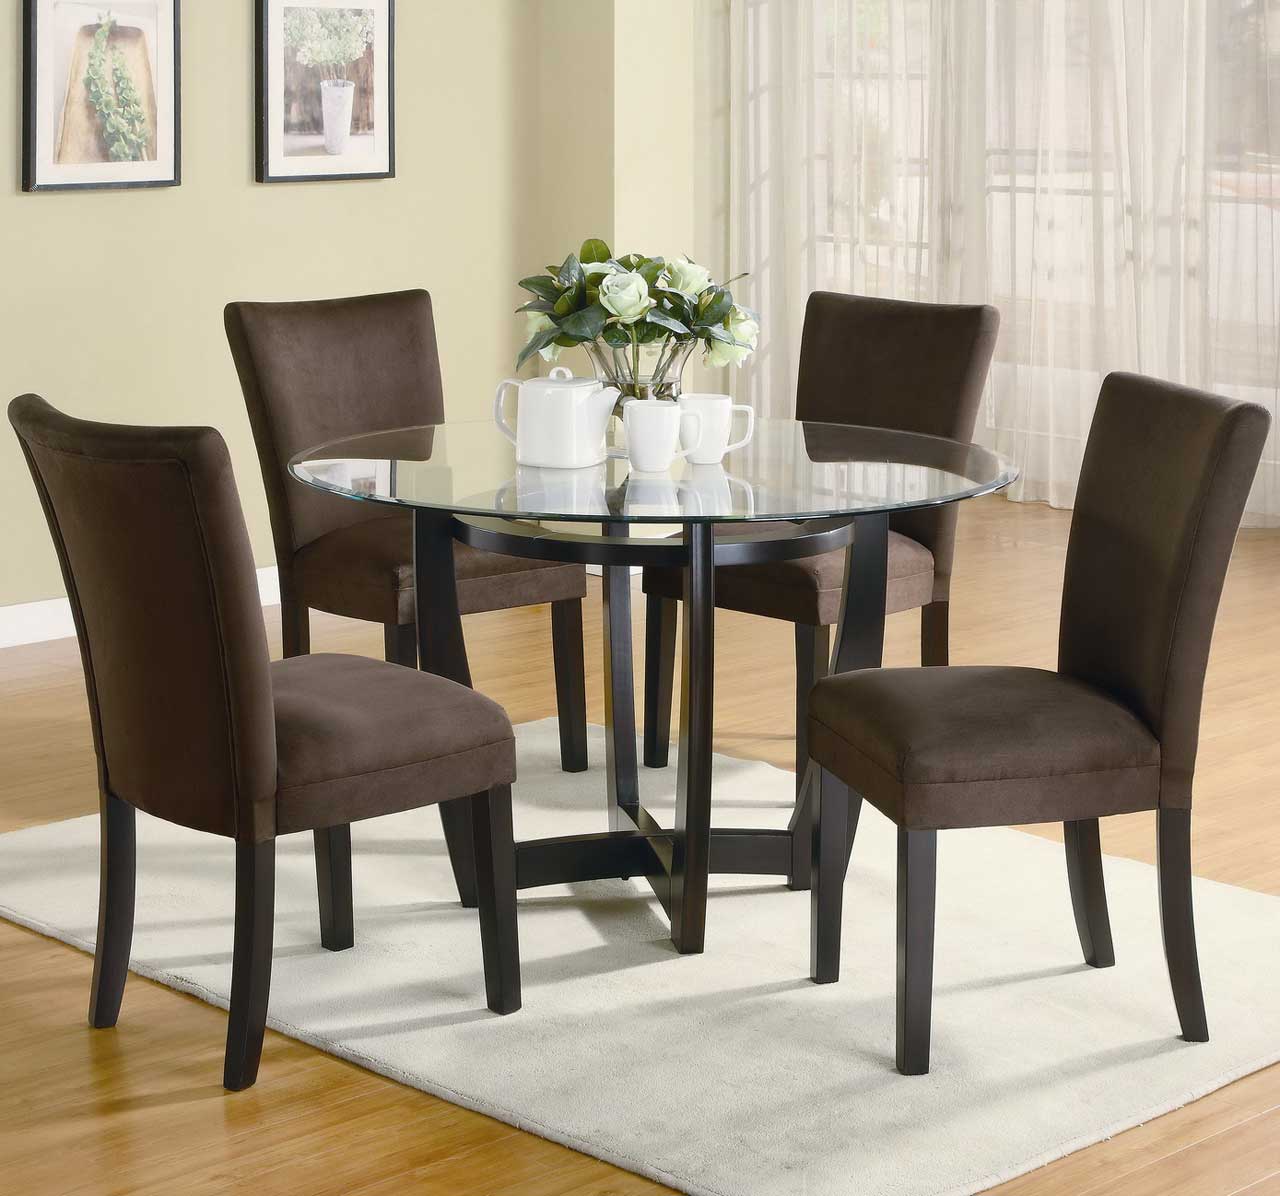 Traditional Formal Dining Awesome Traditional Formal Antique Black Dining Sets With Round Glass Dining Room Table Also Modern Laminate Flooring Design With Glamorous Fur Rug Dining Room Design Ideas Dining Room Wooden Stylish Of Dining Room Chairs